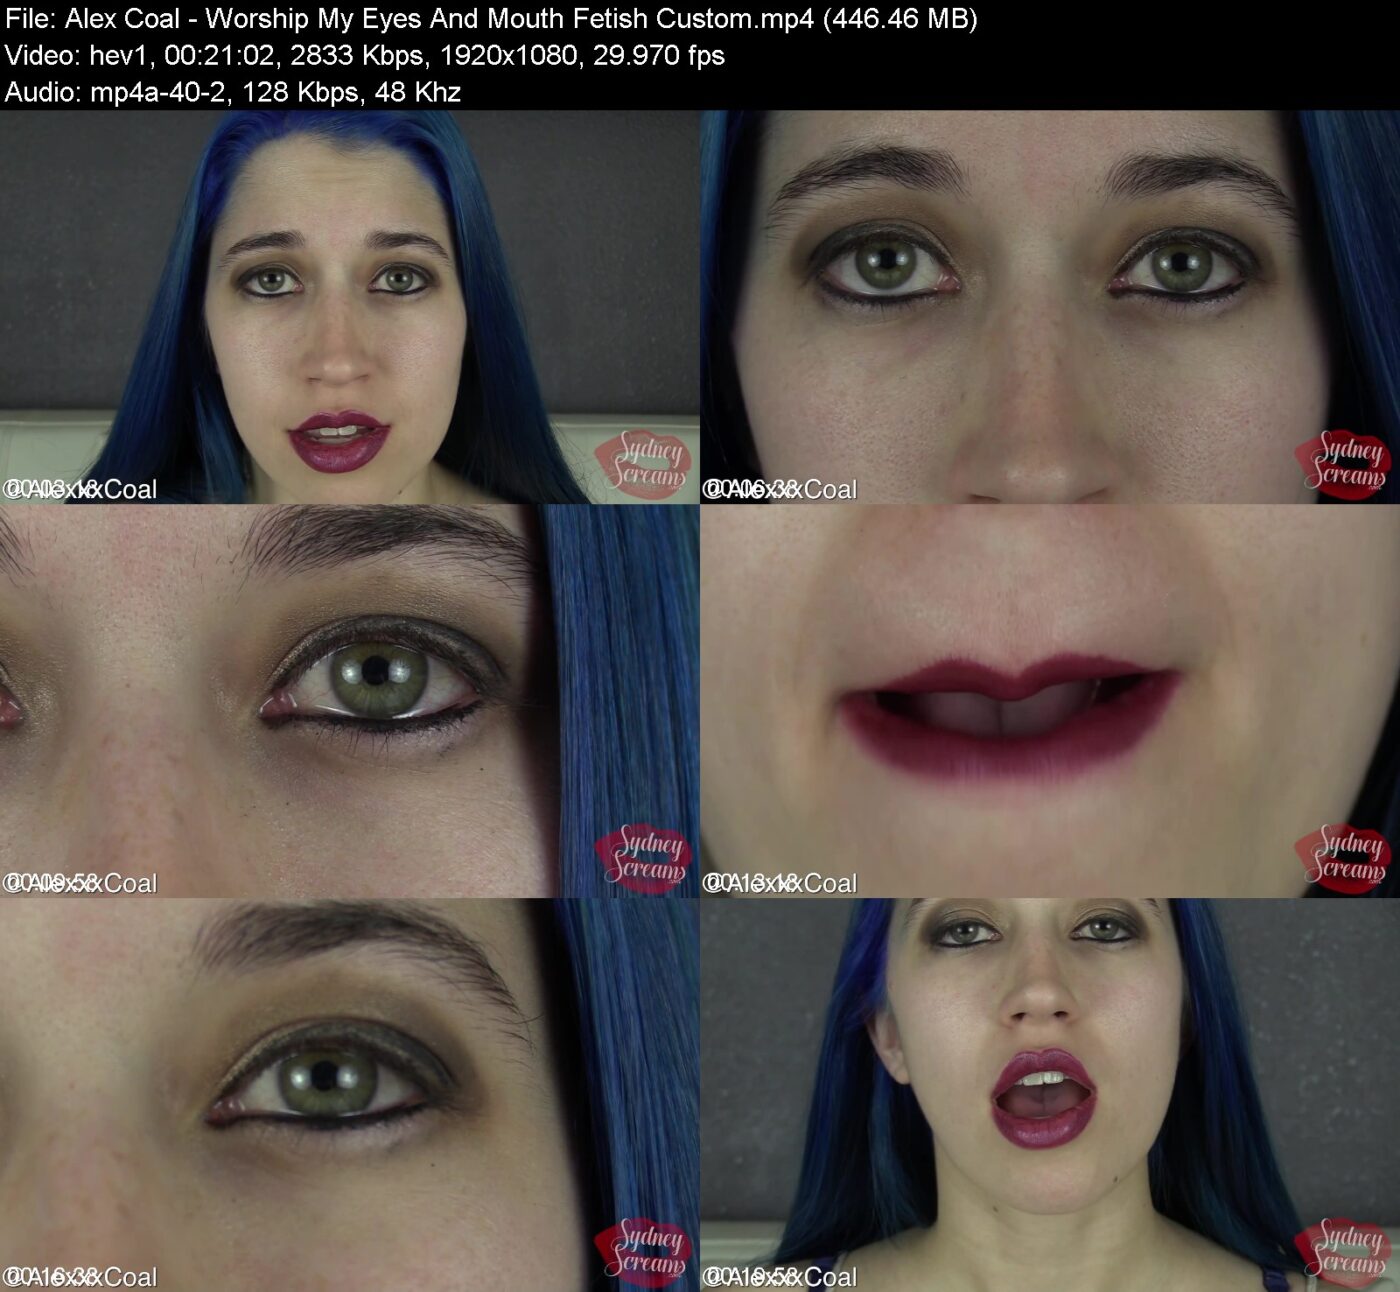 Alex Coal in Worship My Eyes And Mouth Fetish Custom